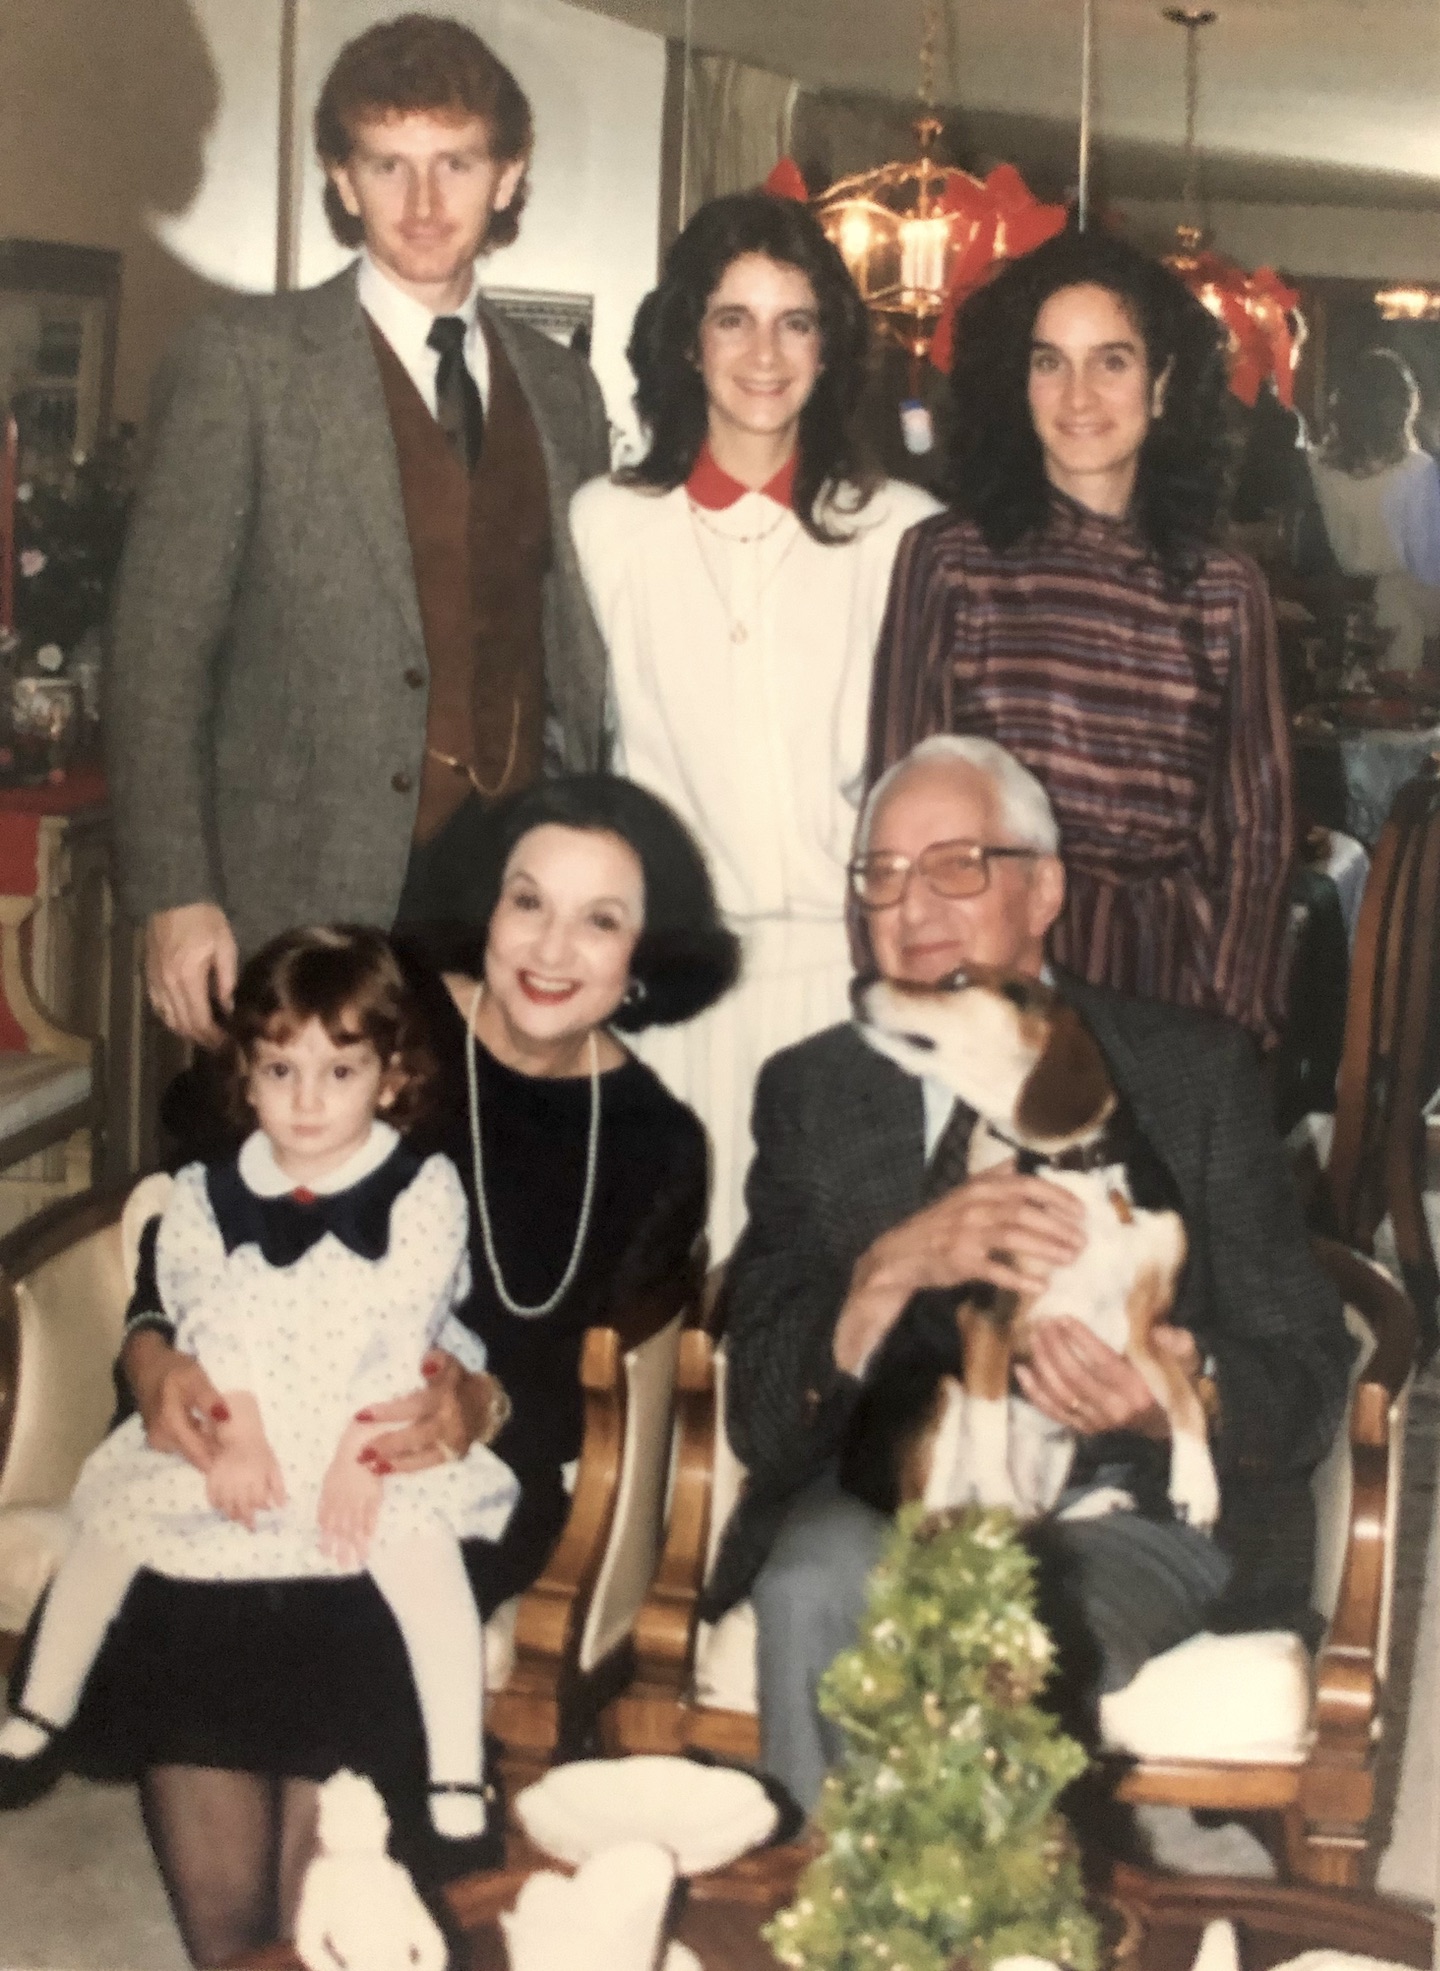 A portrait of the Laham family circa 1980. Cheryl shares, “Same story, different year: my sister's husband, their dog, and first child were all included here, but my partner was not allowed to come to Kansas.” Photo courtesy of Cheryl Qamar.